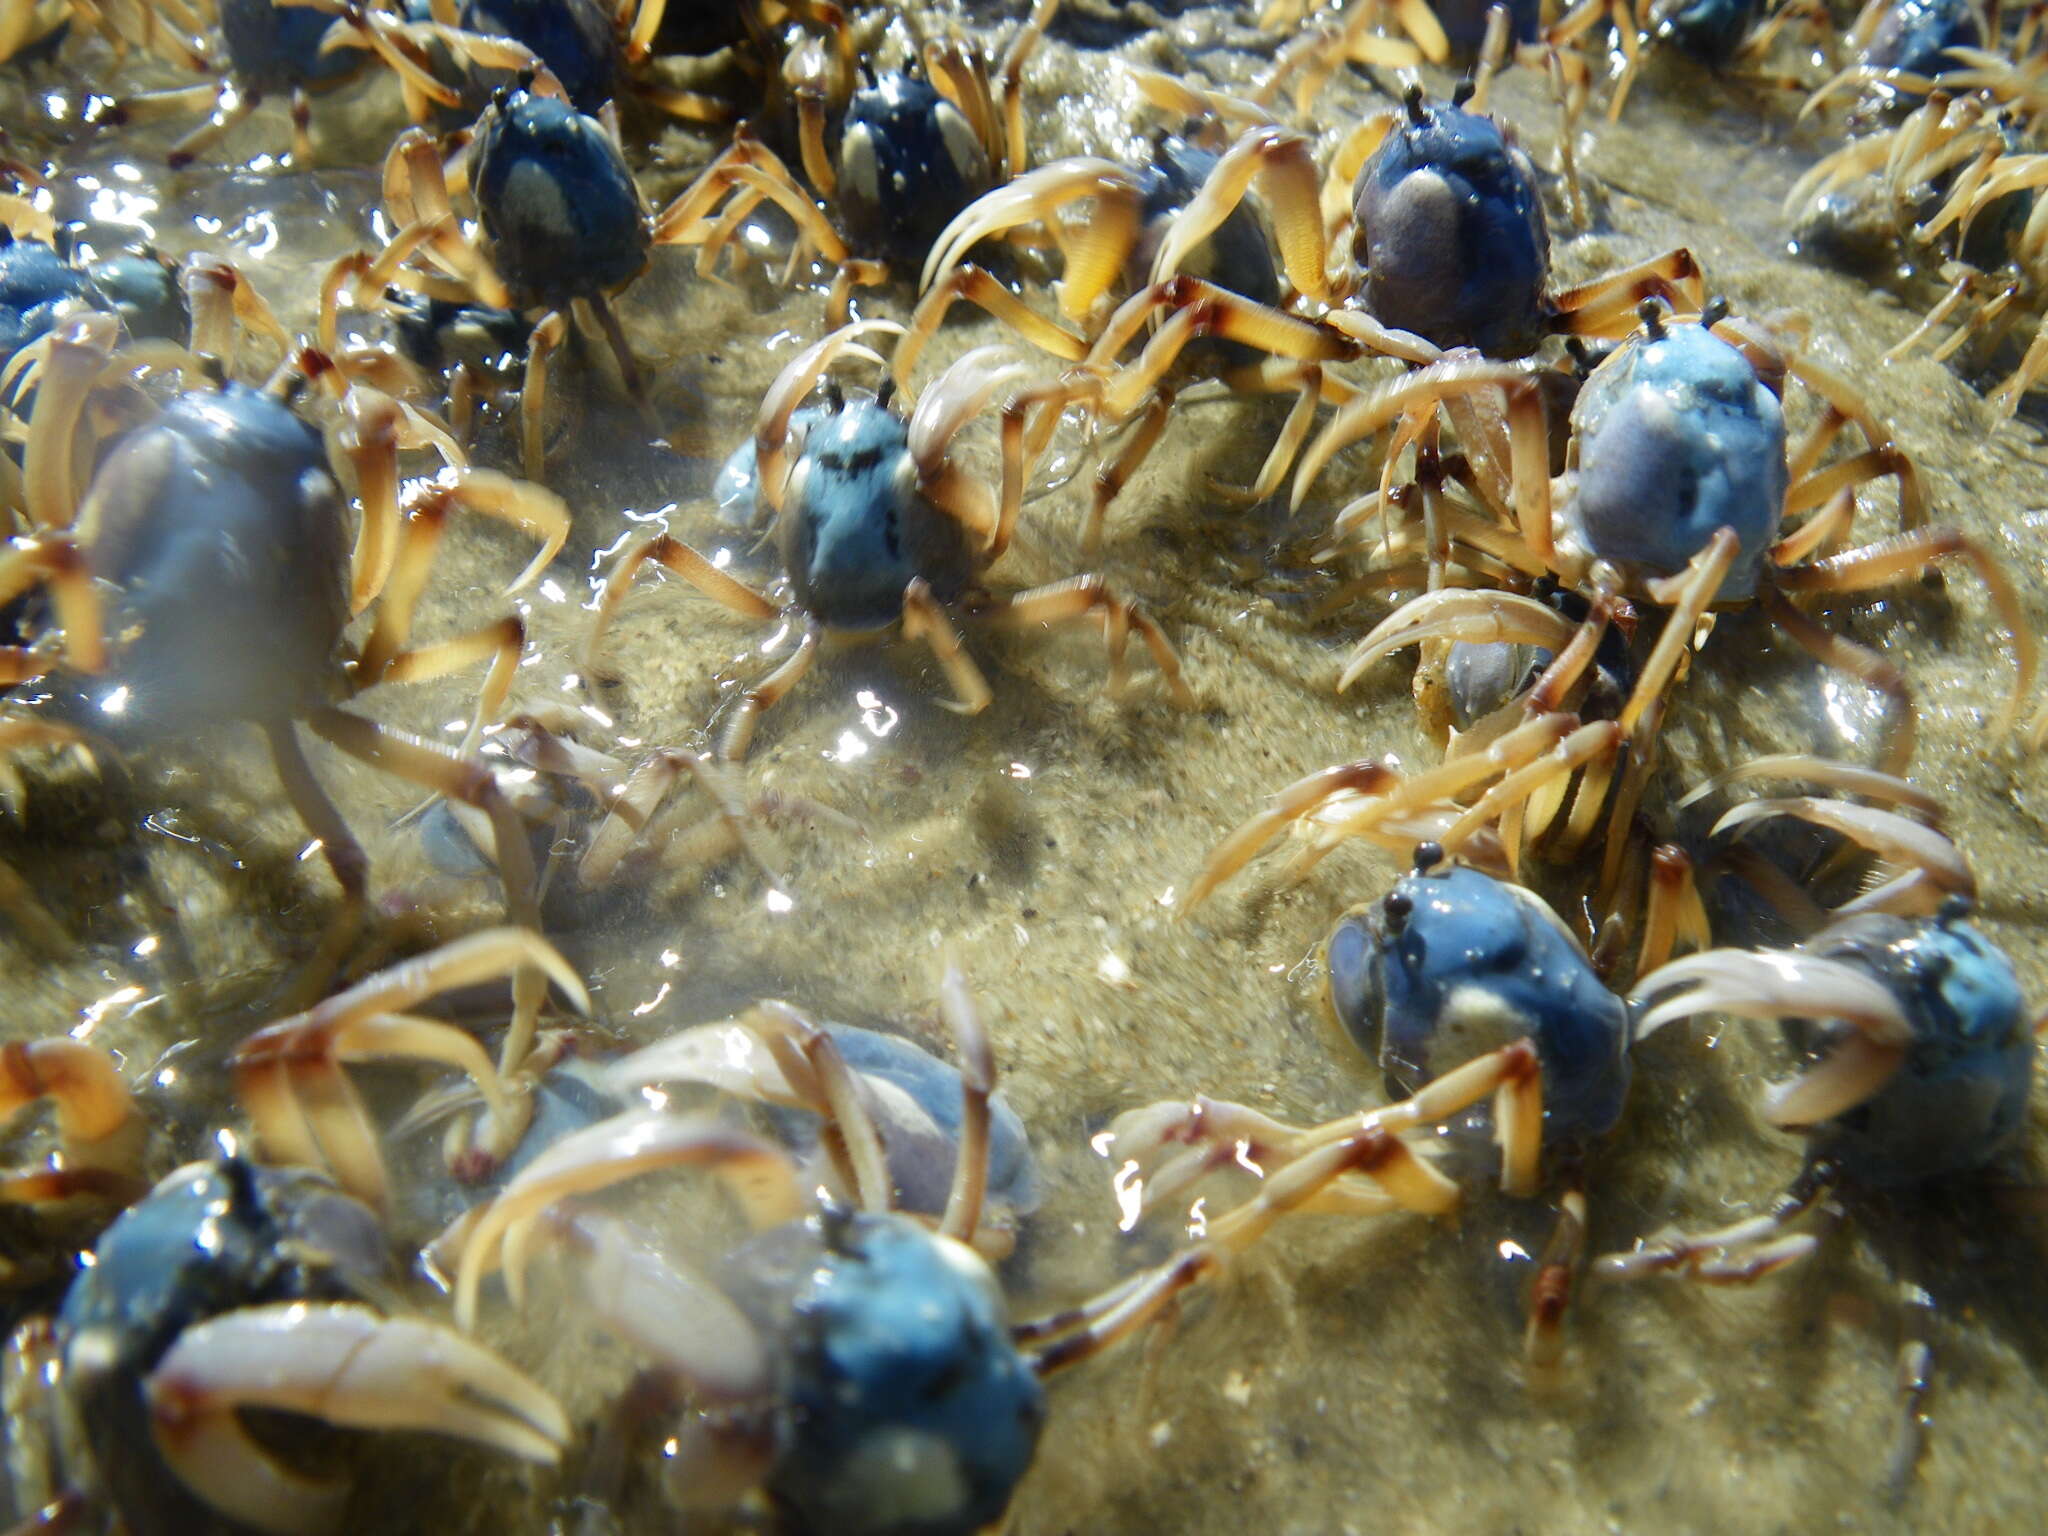 Image of Light-blue Soldier Crab